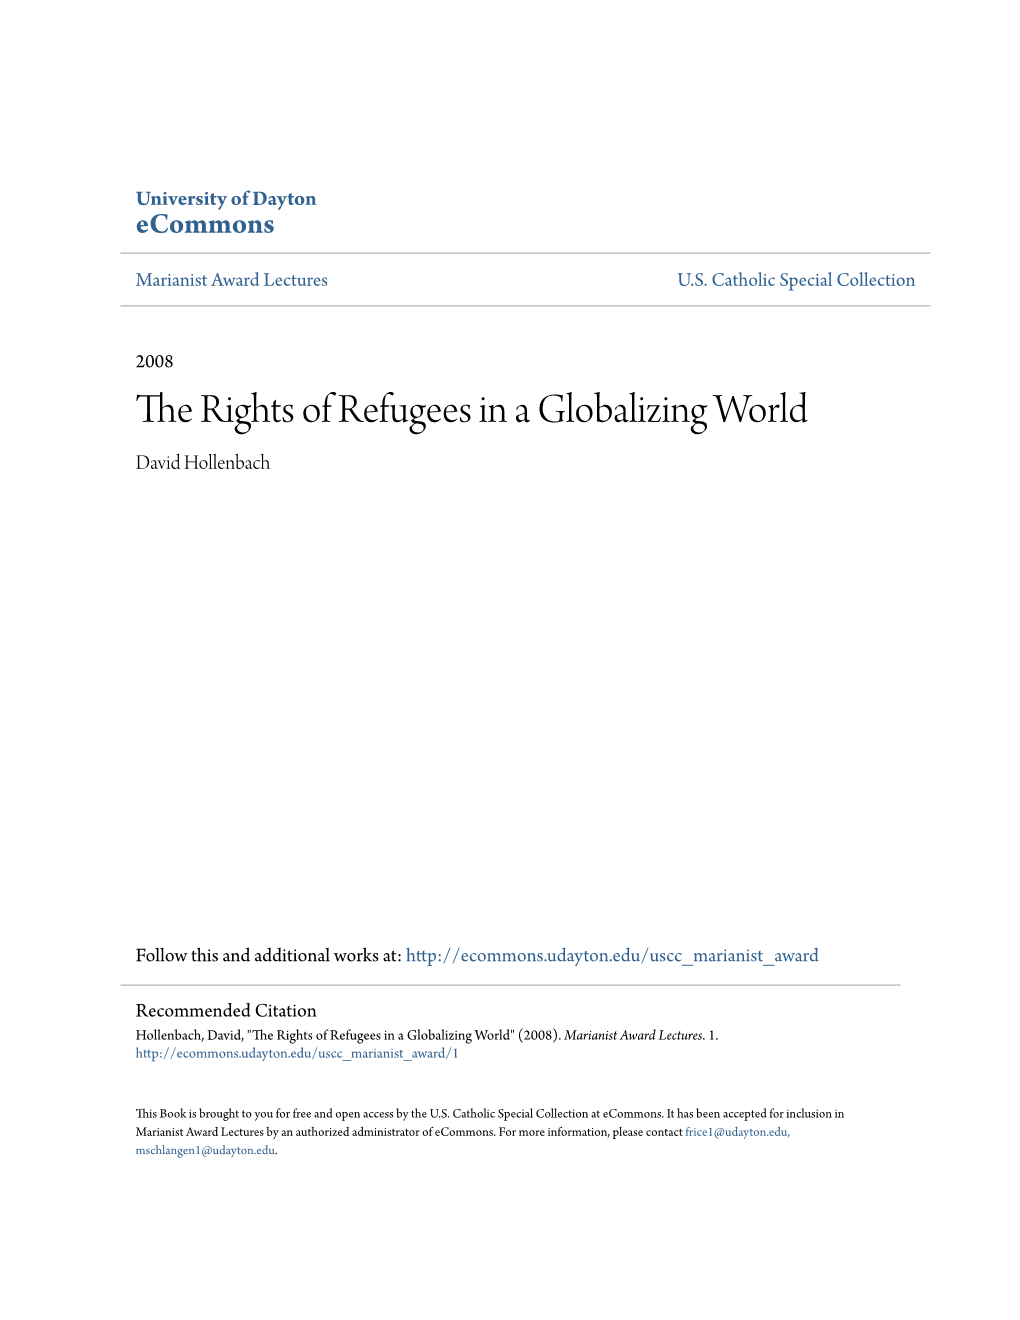 The Rights of Refugees in a Globalizing World David Hollenbach